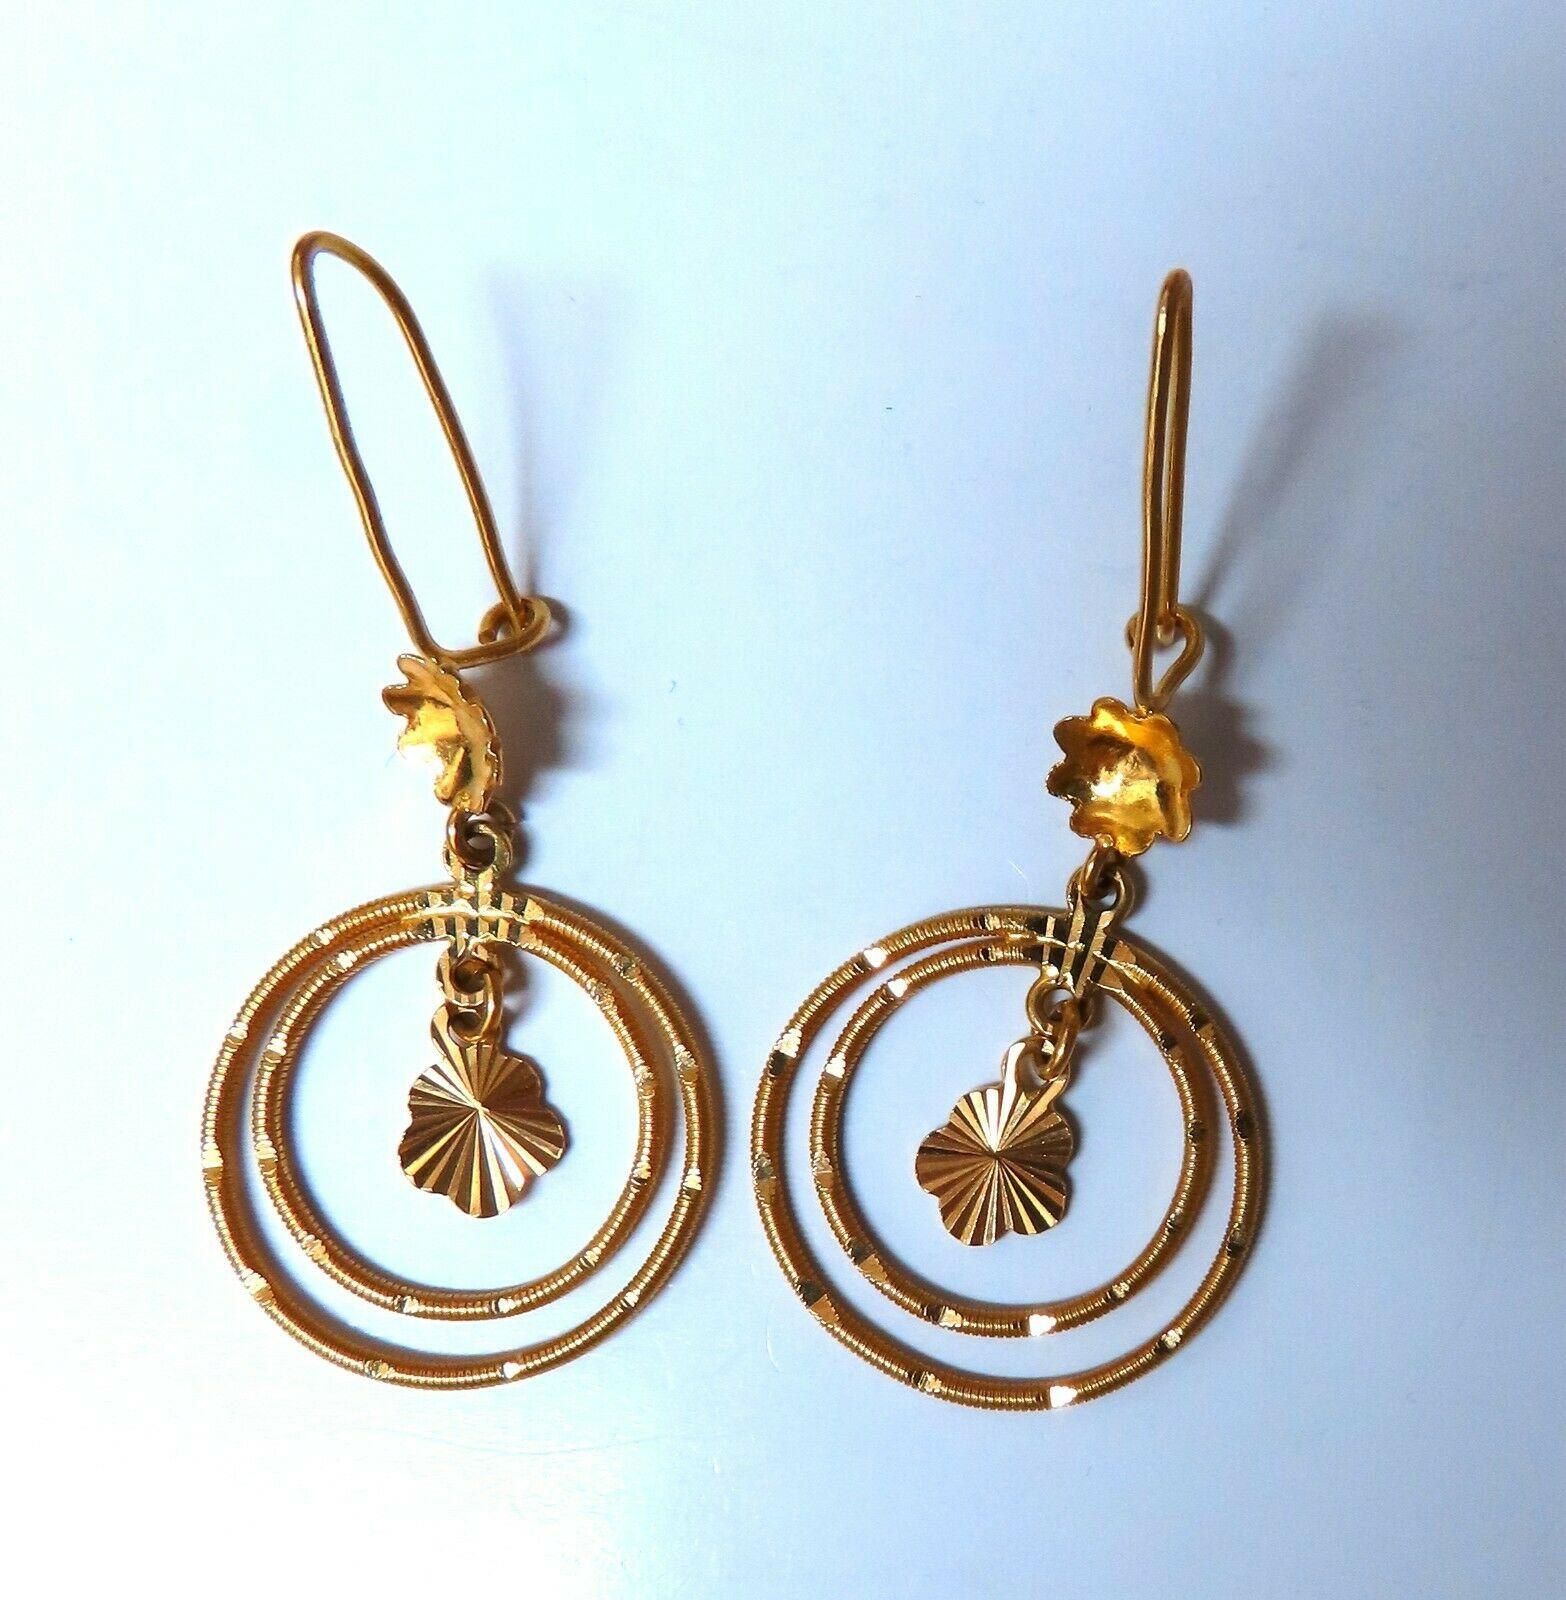 Hand Made Dangle Earrings

Measurements: 

1.85 inch long

.84 inch wide circle

Comfortable Loop 

5.6 grams / 21kt. Yellow Gold

Earrings are gorgeous made